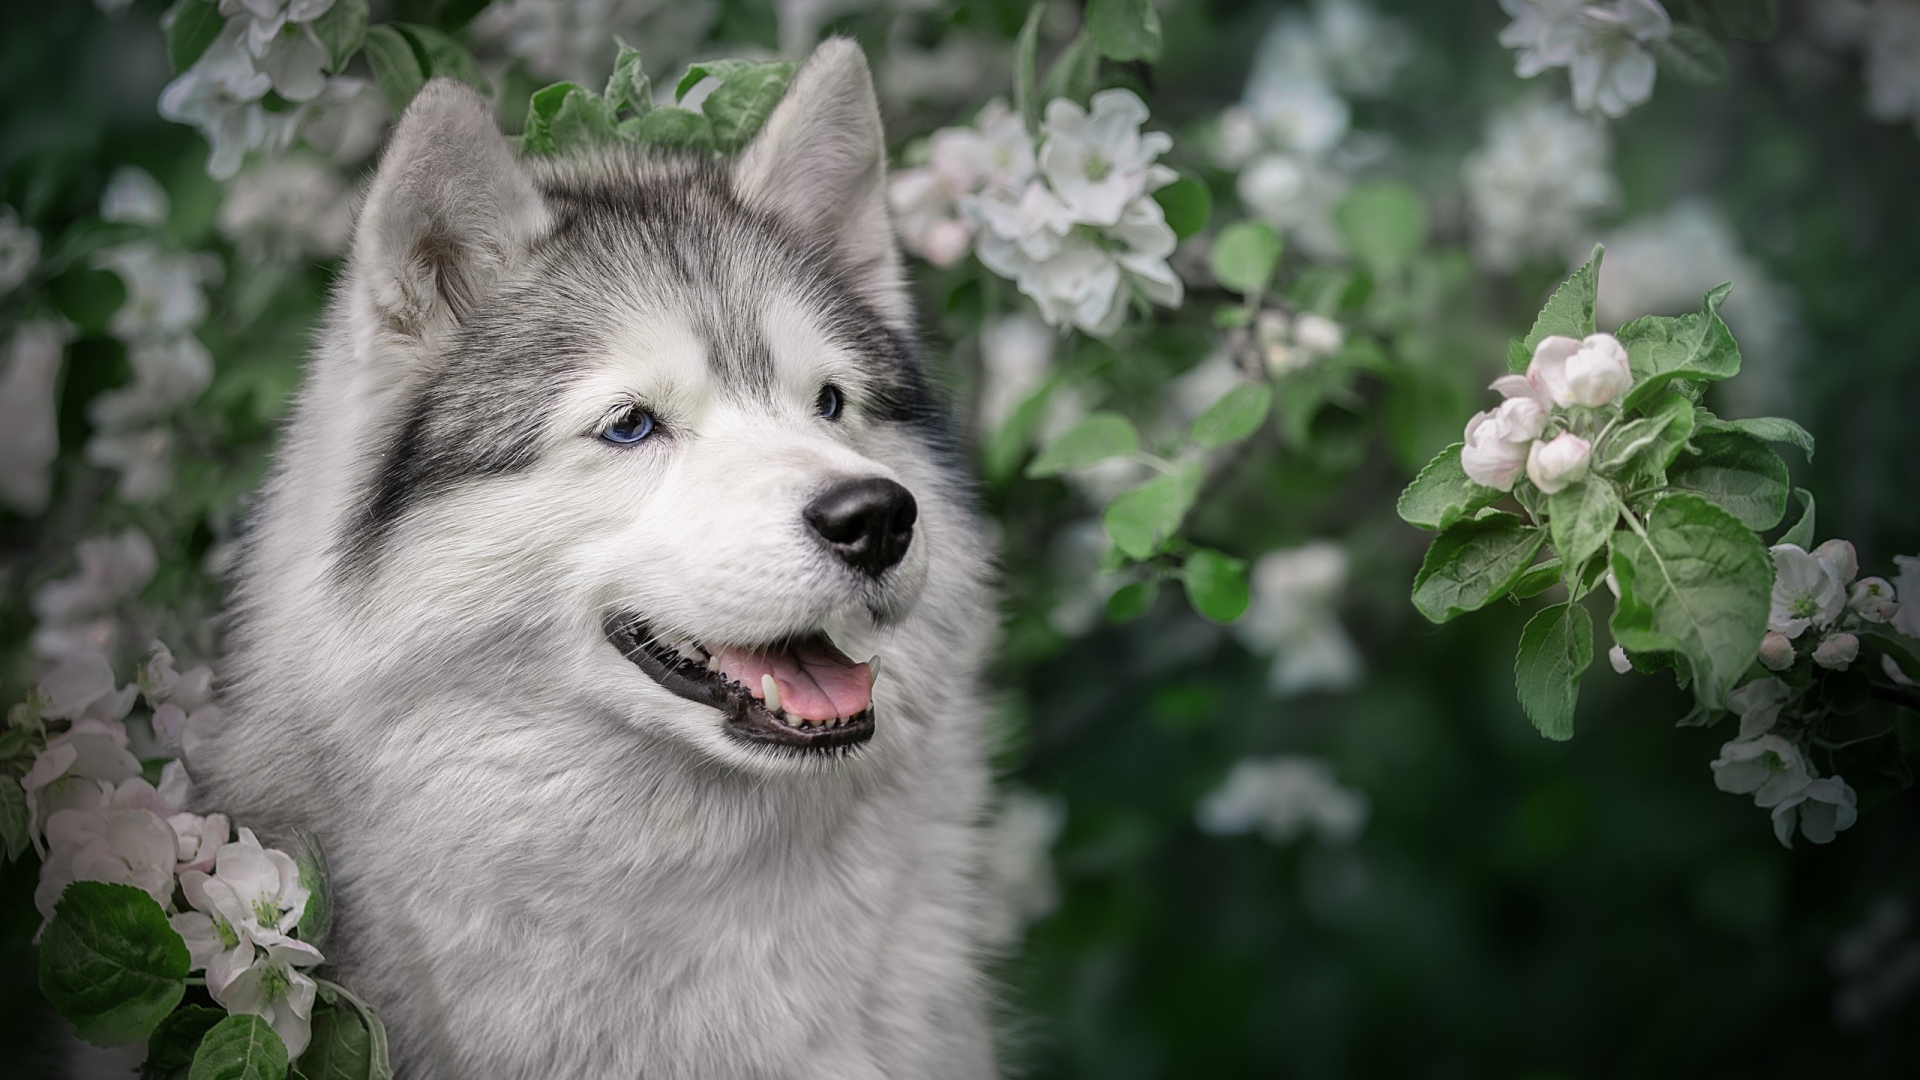 Husky with his tongue hanging out in apple blossom